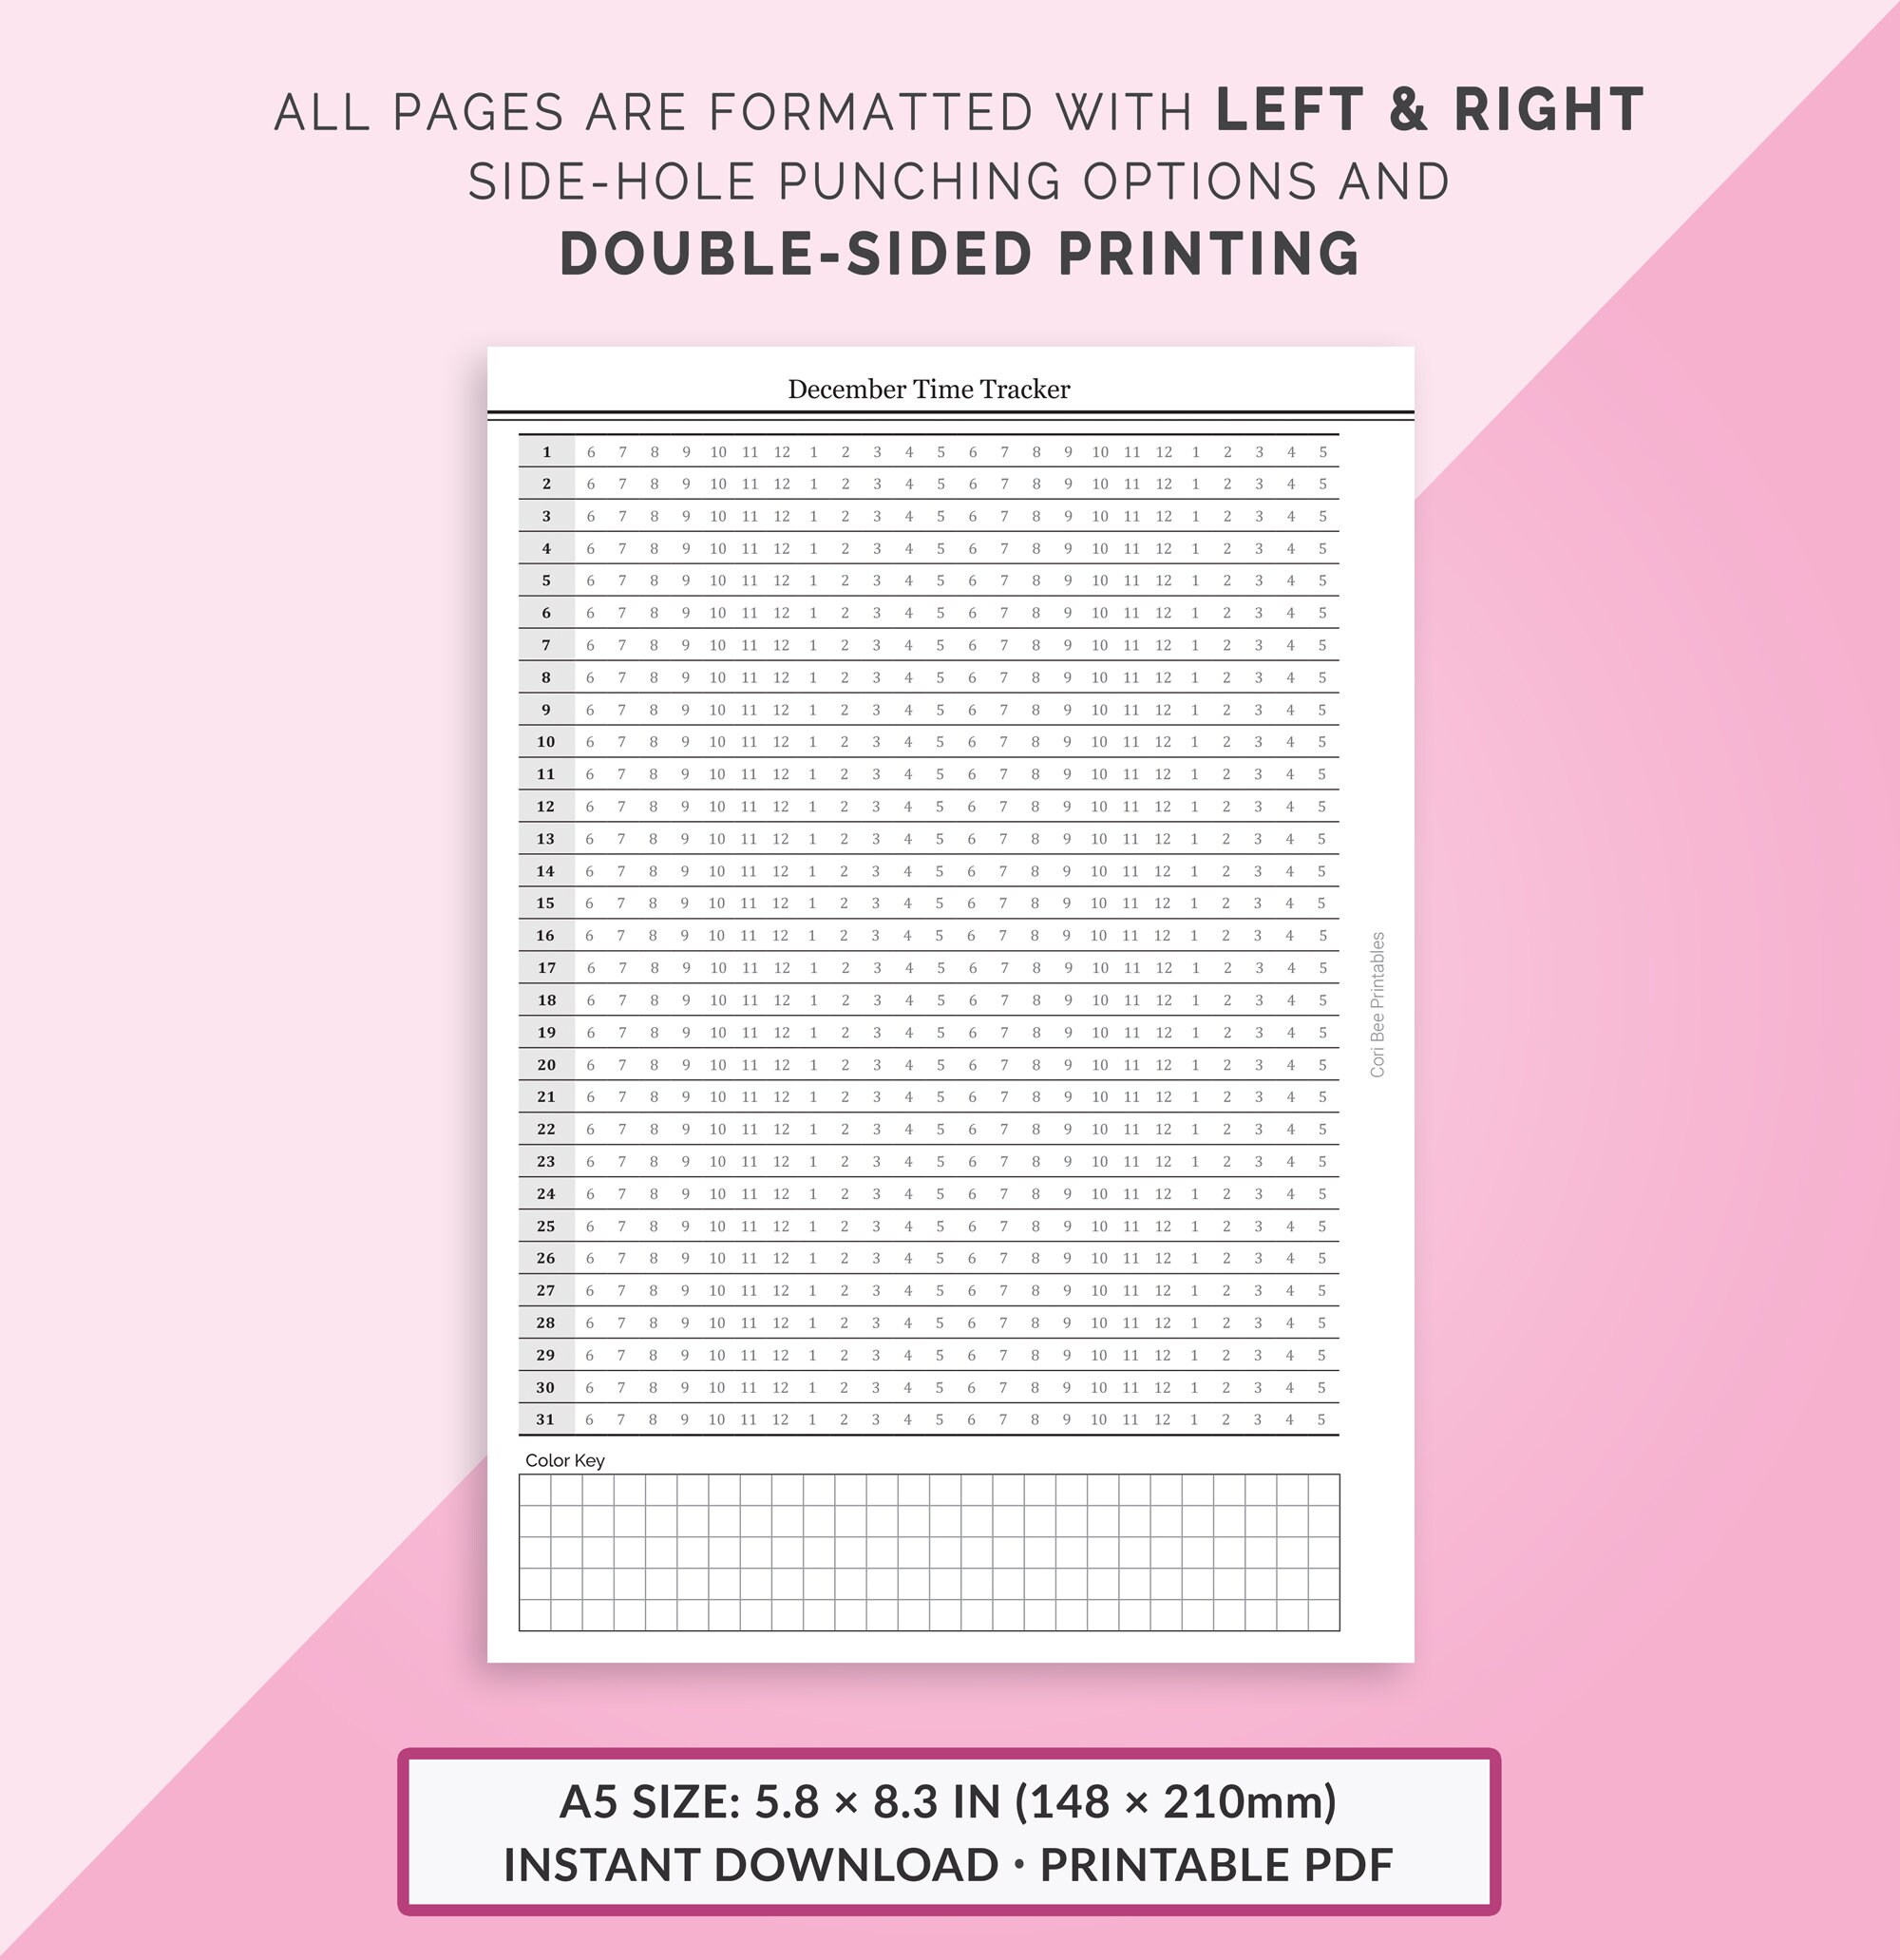 a5-time-tracker-24-hour-printable-monthly-hourly-tracker-etsy